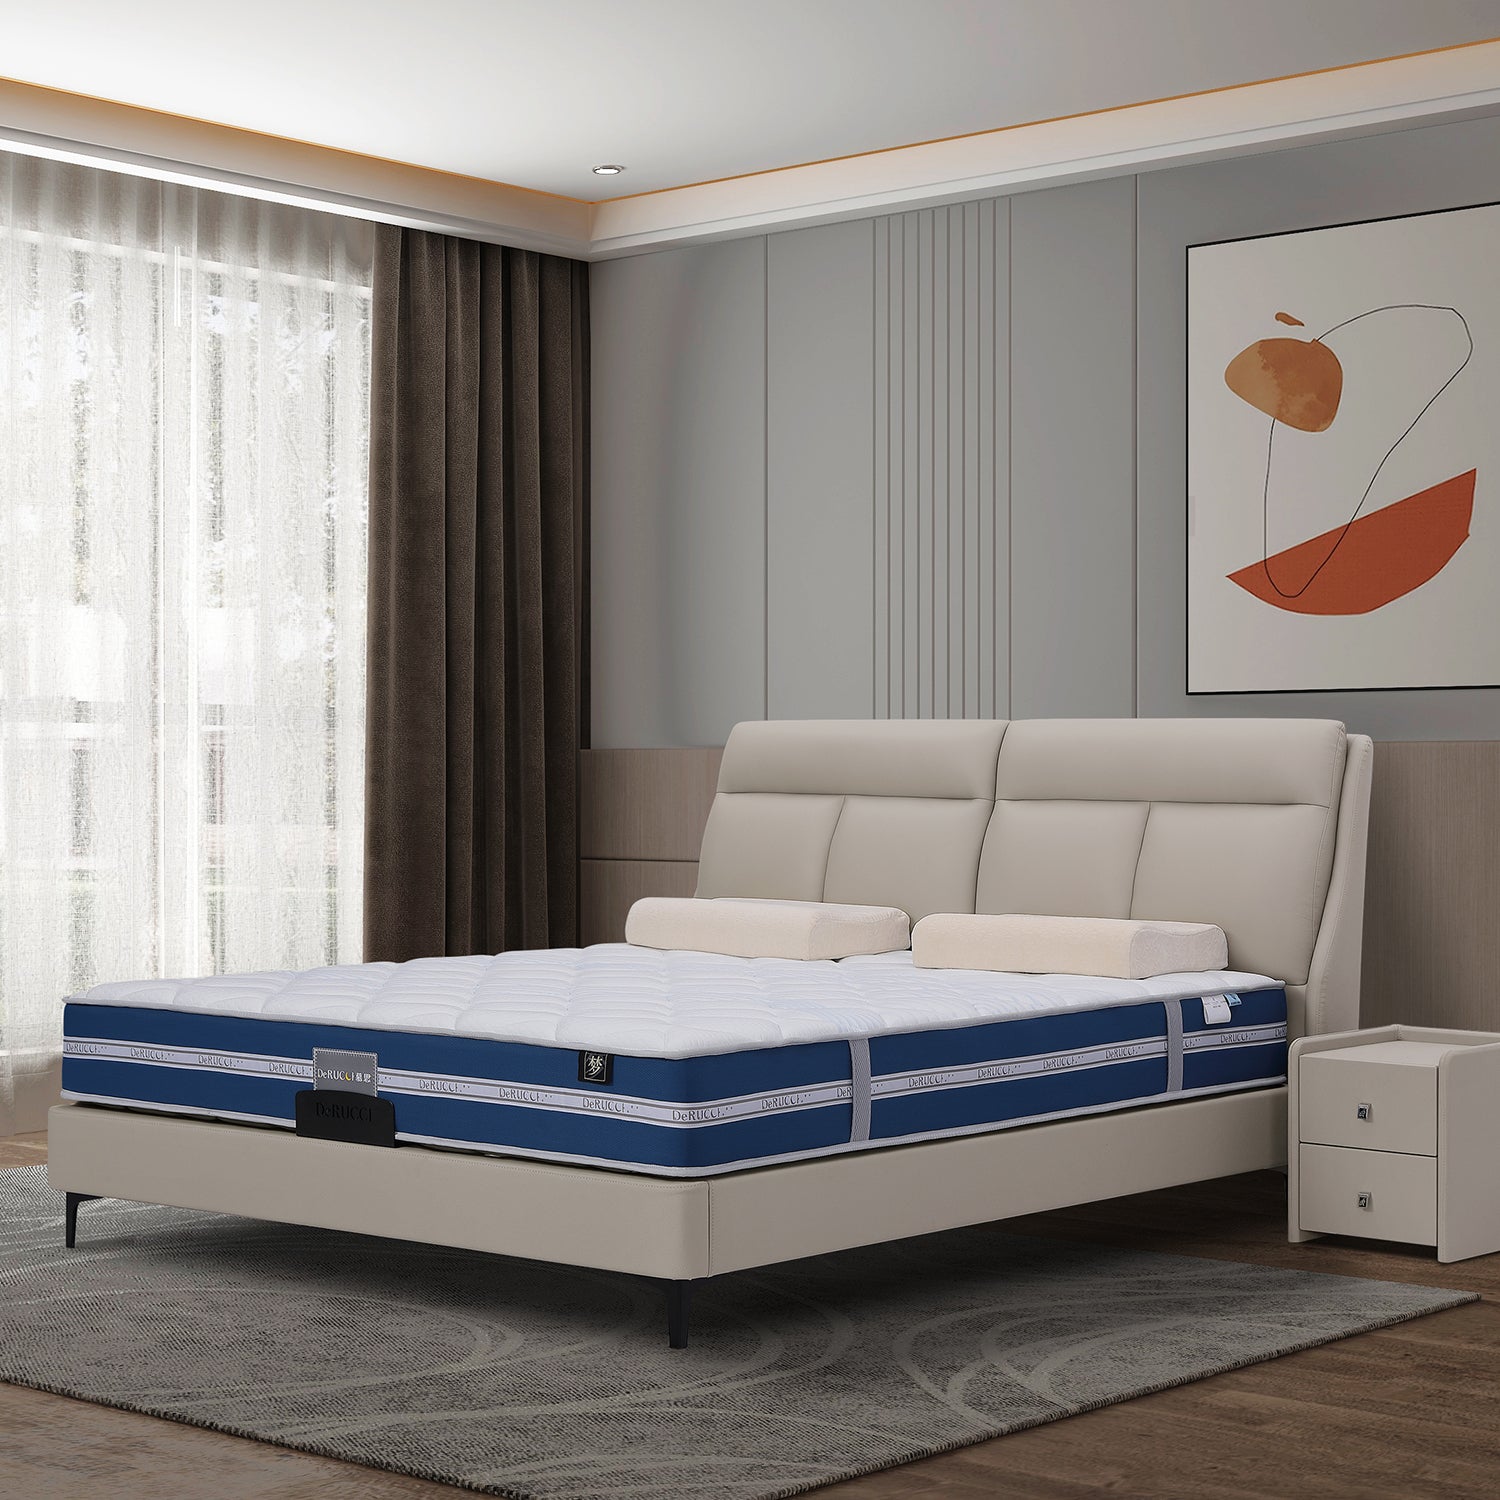 DeRUCCI Bed Frame BOC1 - 002 in beige leather with a blue and white mattress, white pillows, and a matching nightstand in a modern bedroom setting.